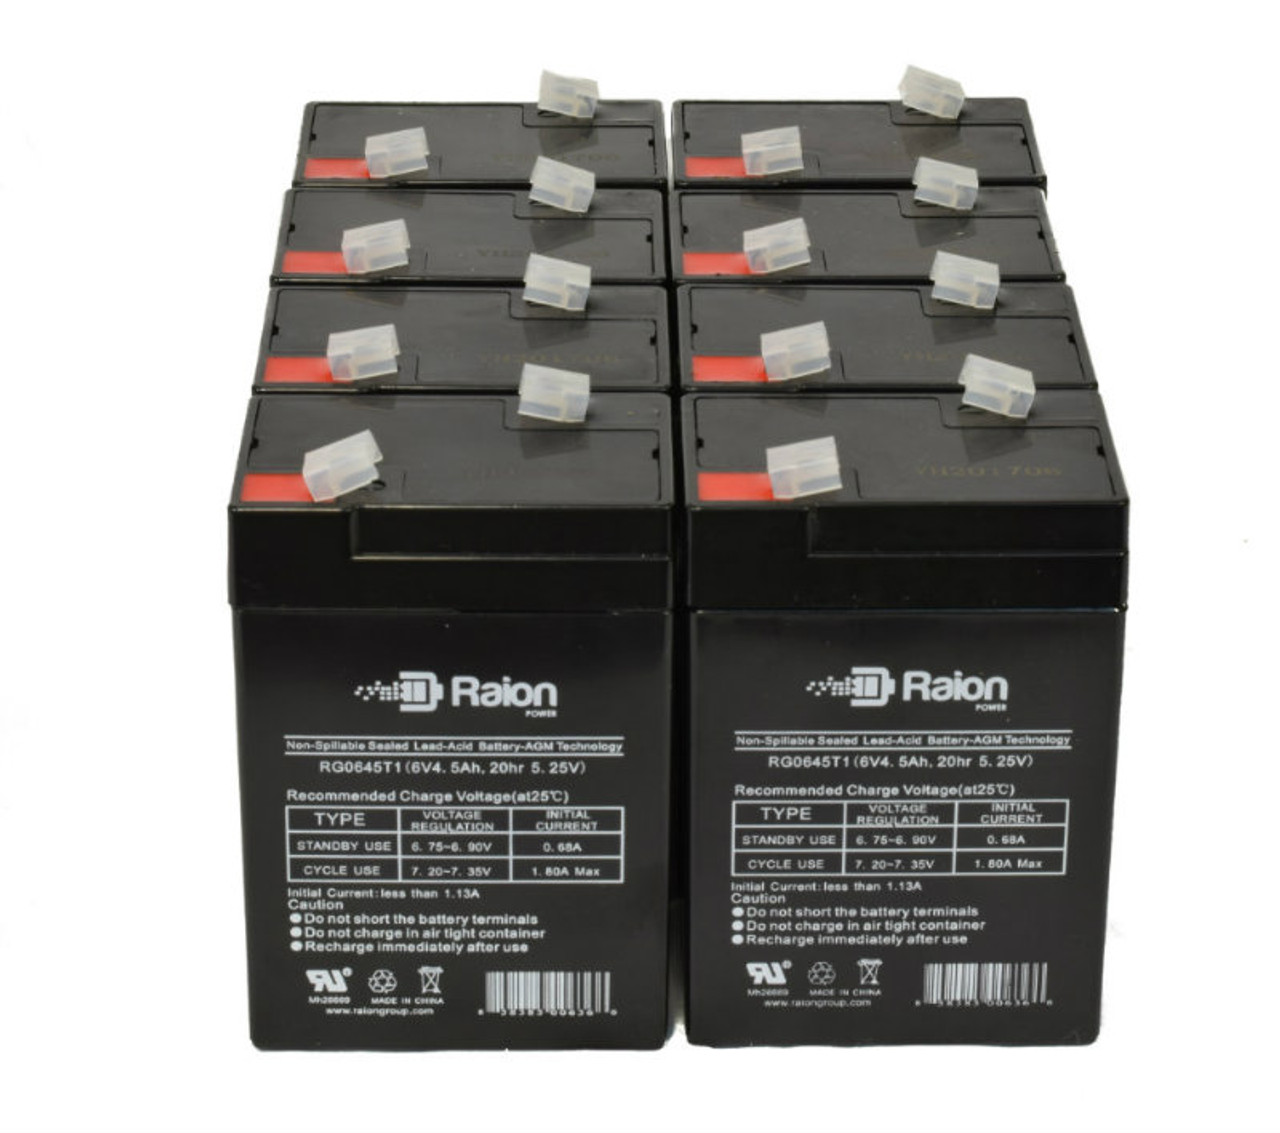 Raion Power 6 Volt 4.5Ah RG0645T1 Replacement Battery for Liven LV4.5-6 - 8 Pack